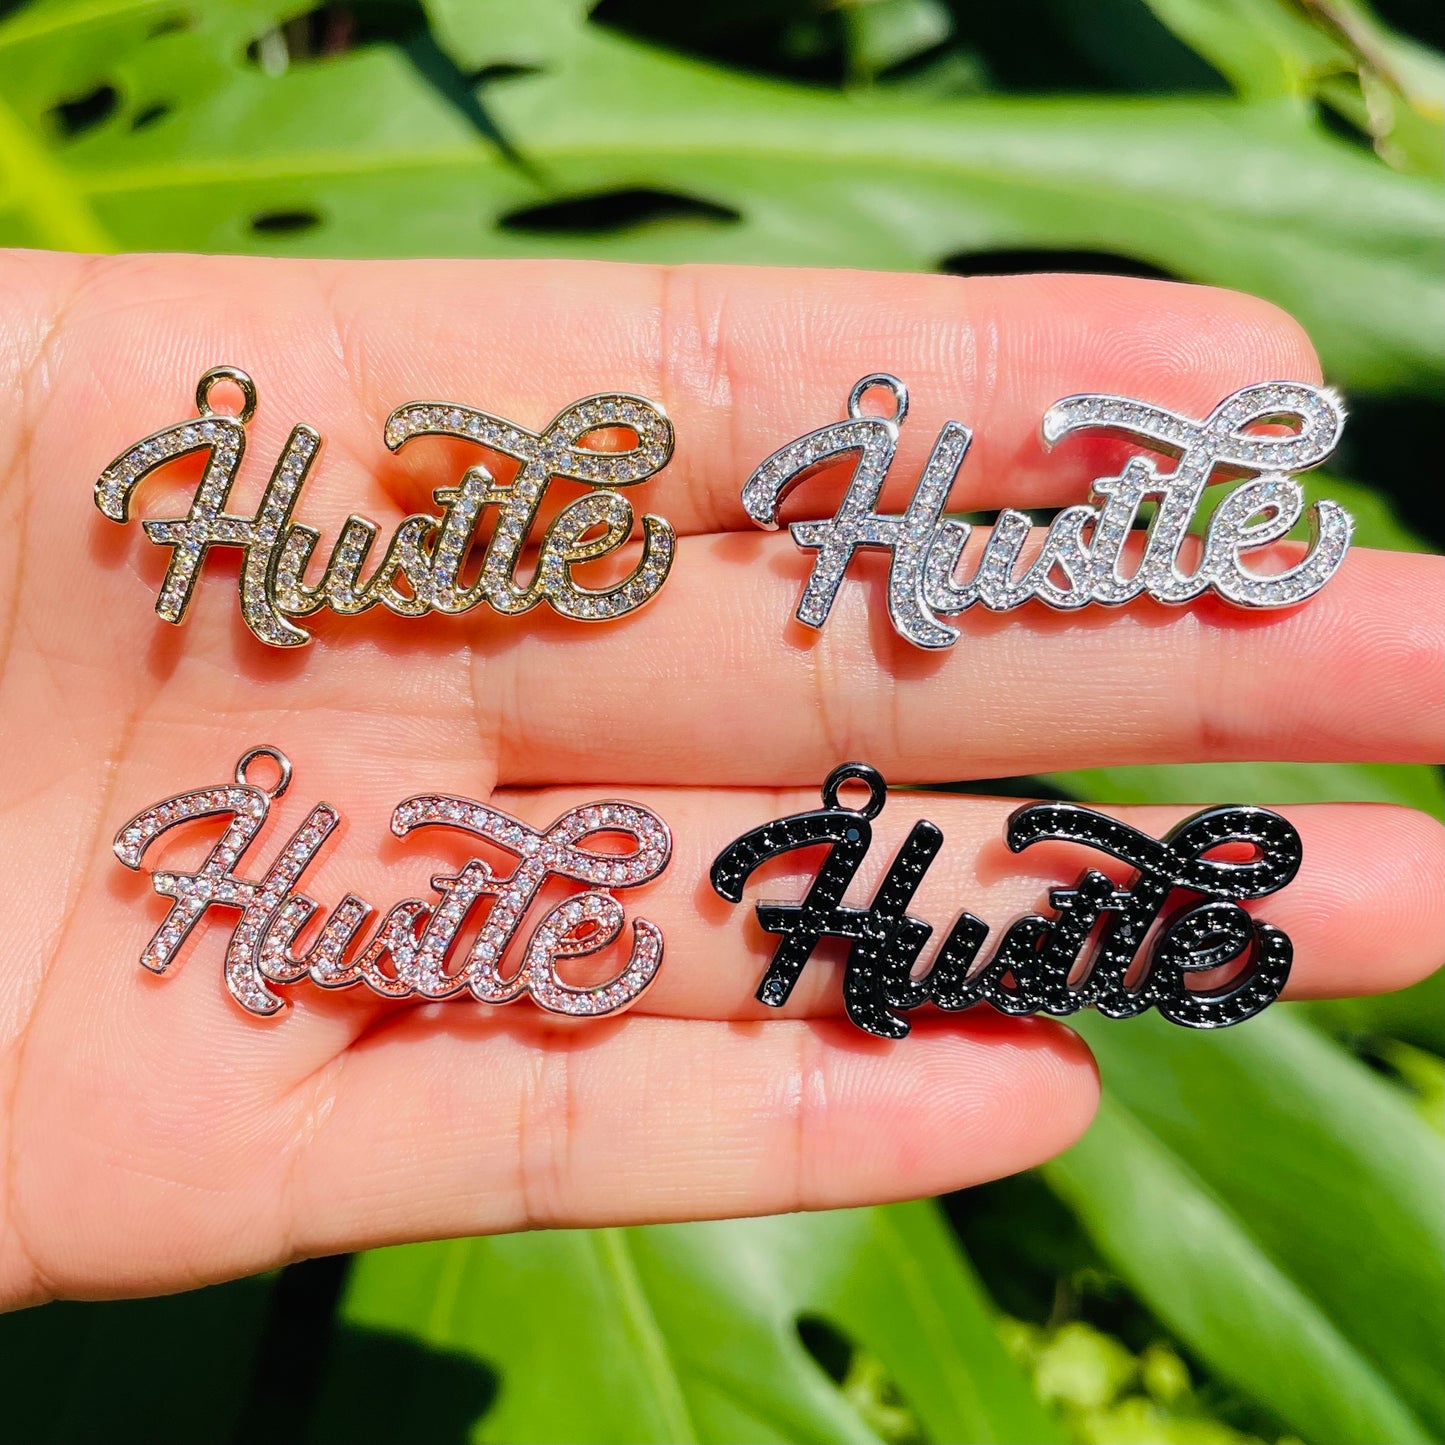 10pcs/lot 37.5*18mm CZ Paved Hustle Charms Mix Color CZ Paved Charms On Sale Words & Quotes Charms Beads Beyond